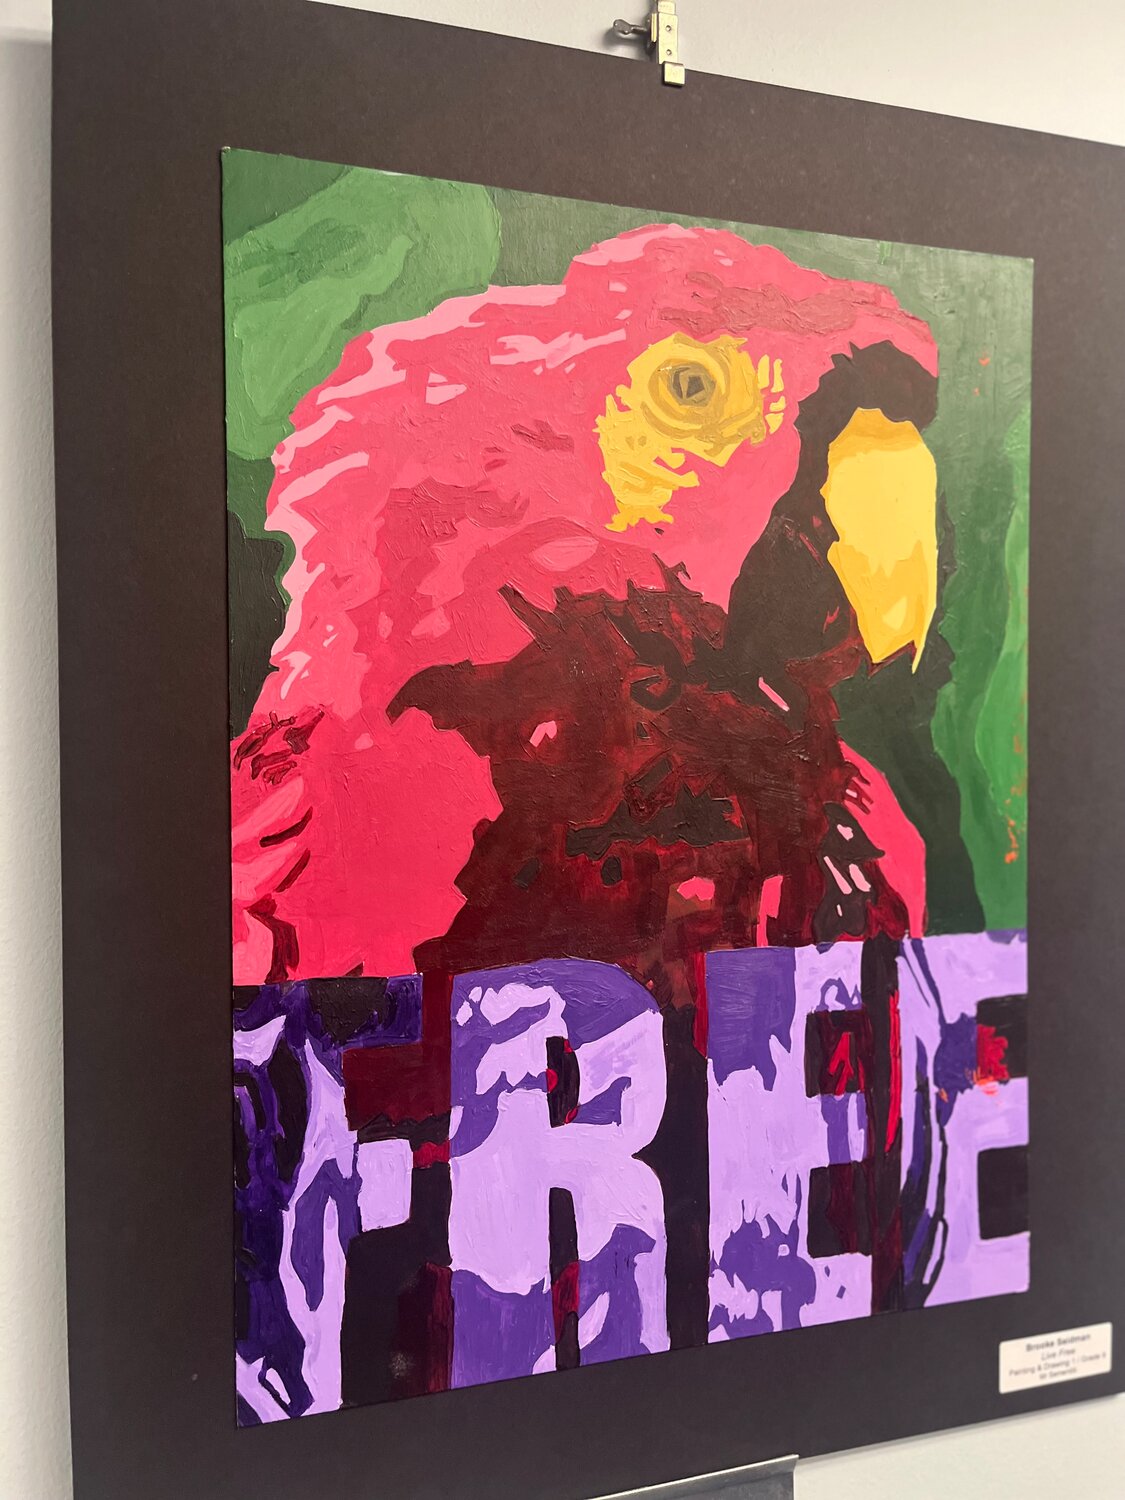 “Live Free” by Brooke Seidman, a South Side High School freshman, is one of several colorful pieces on display.